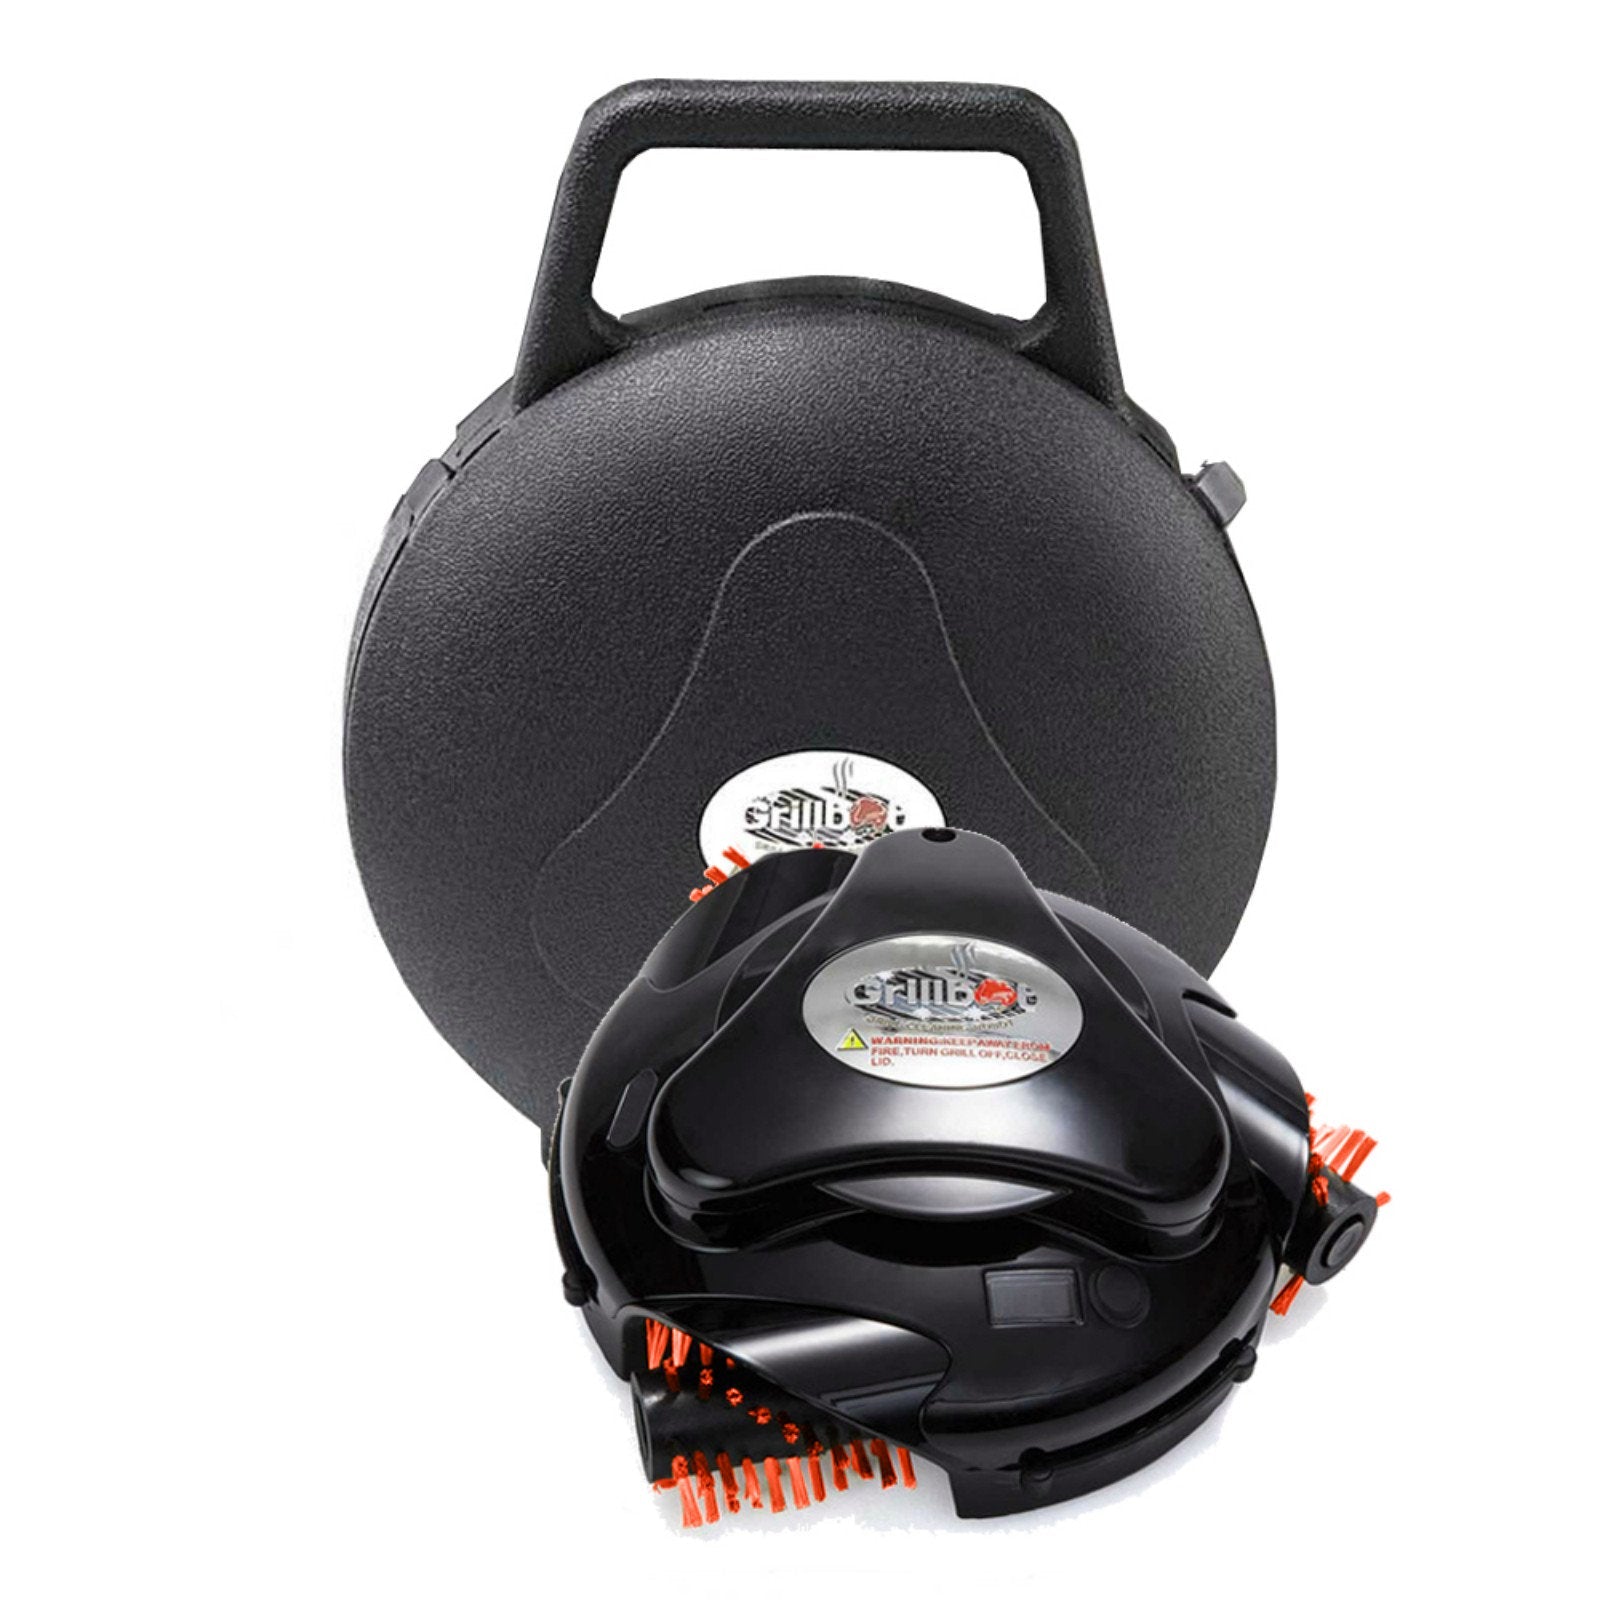 Grillbots Grillbot Robot Automatic Grill Cleaner Black – Svmproducts